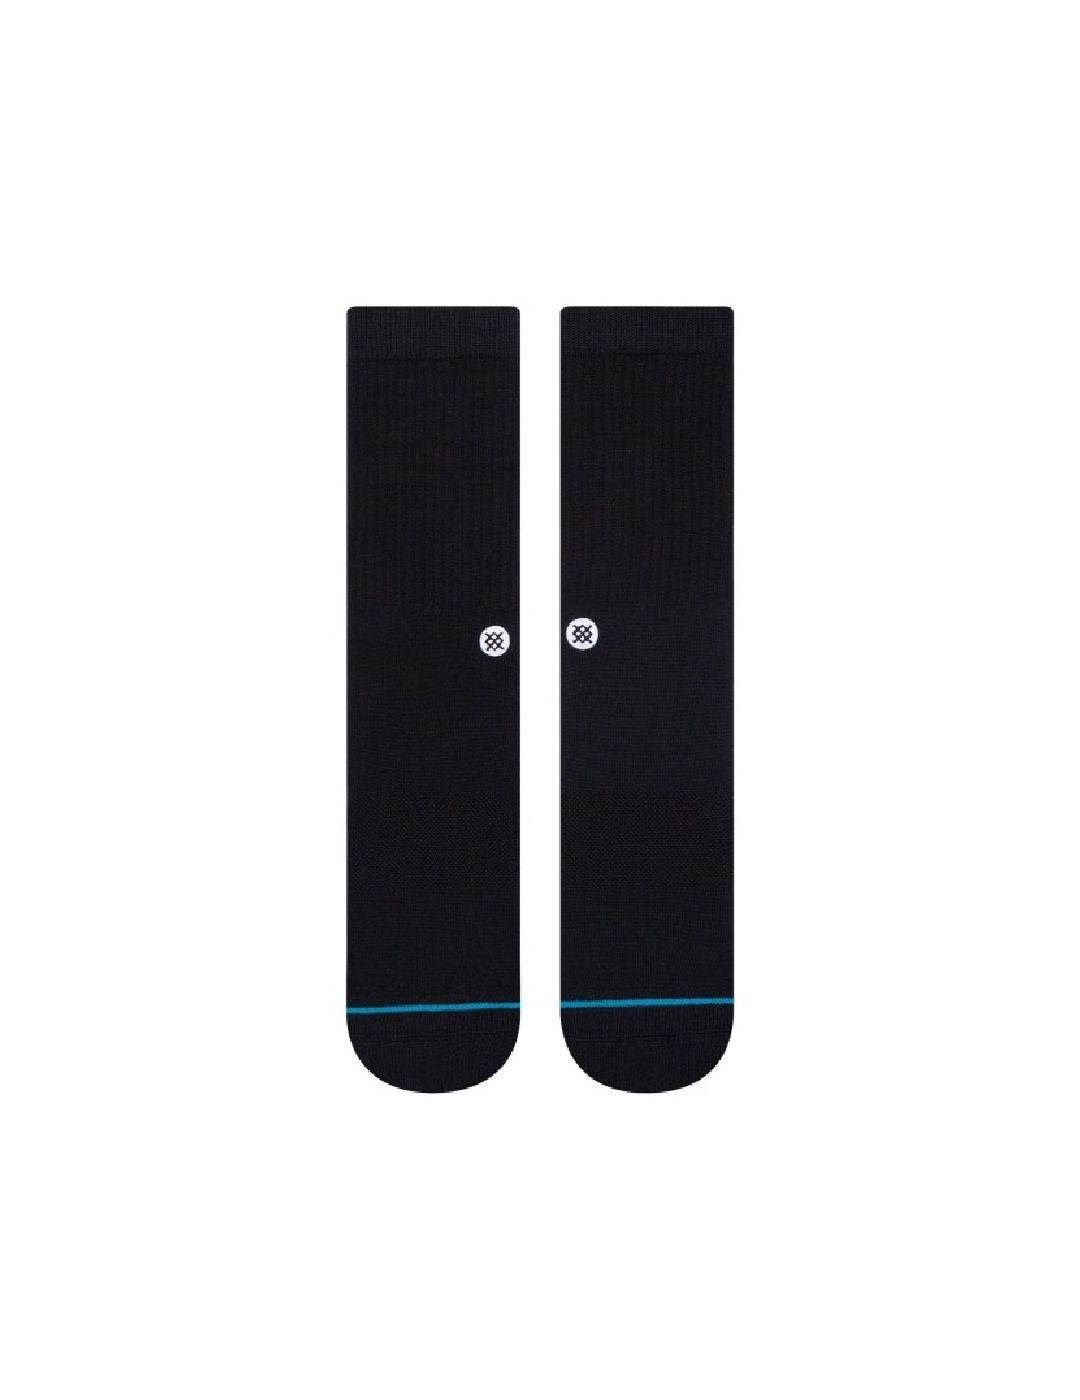 Calcetines Stance Icon Negro